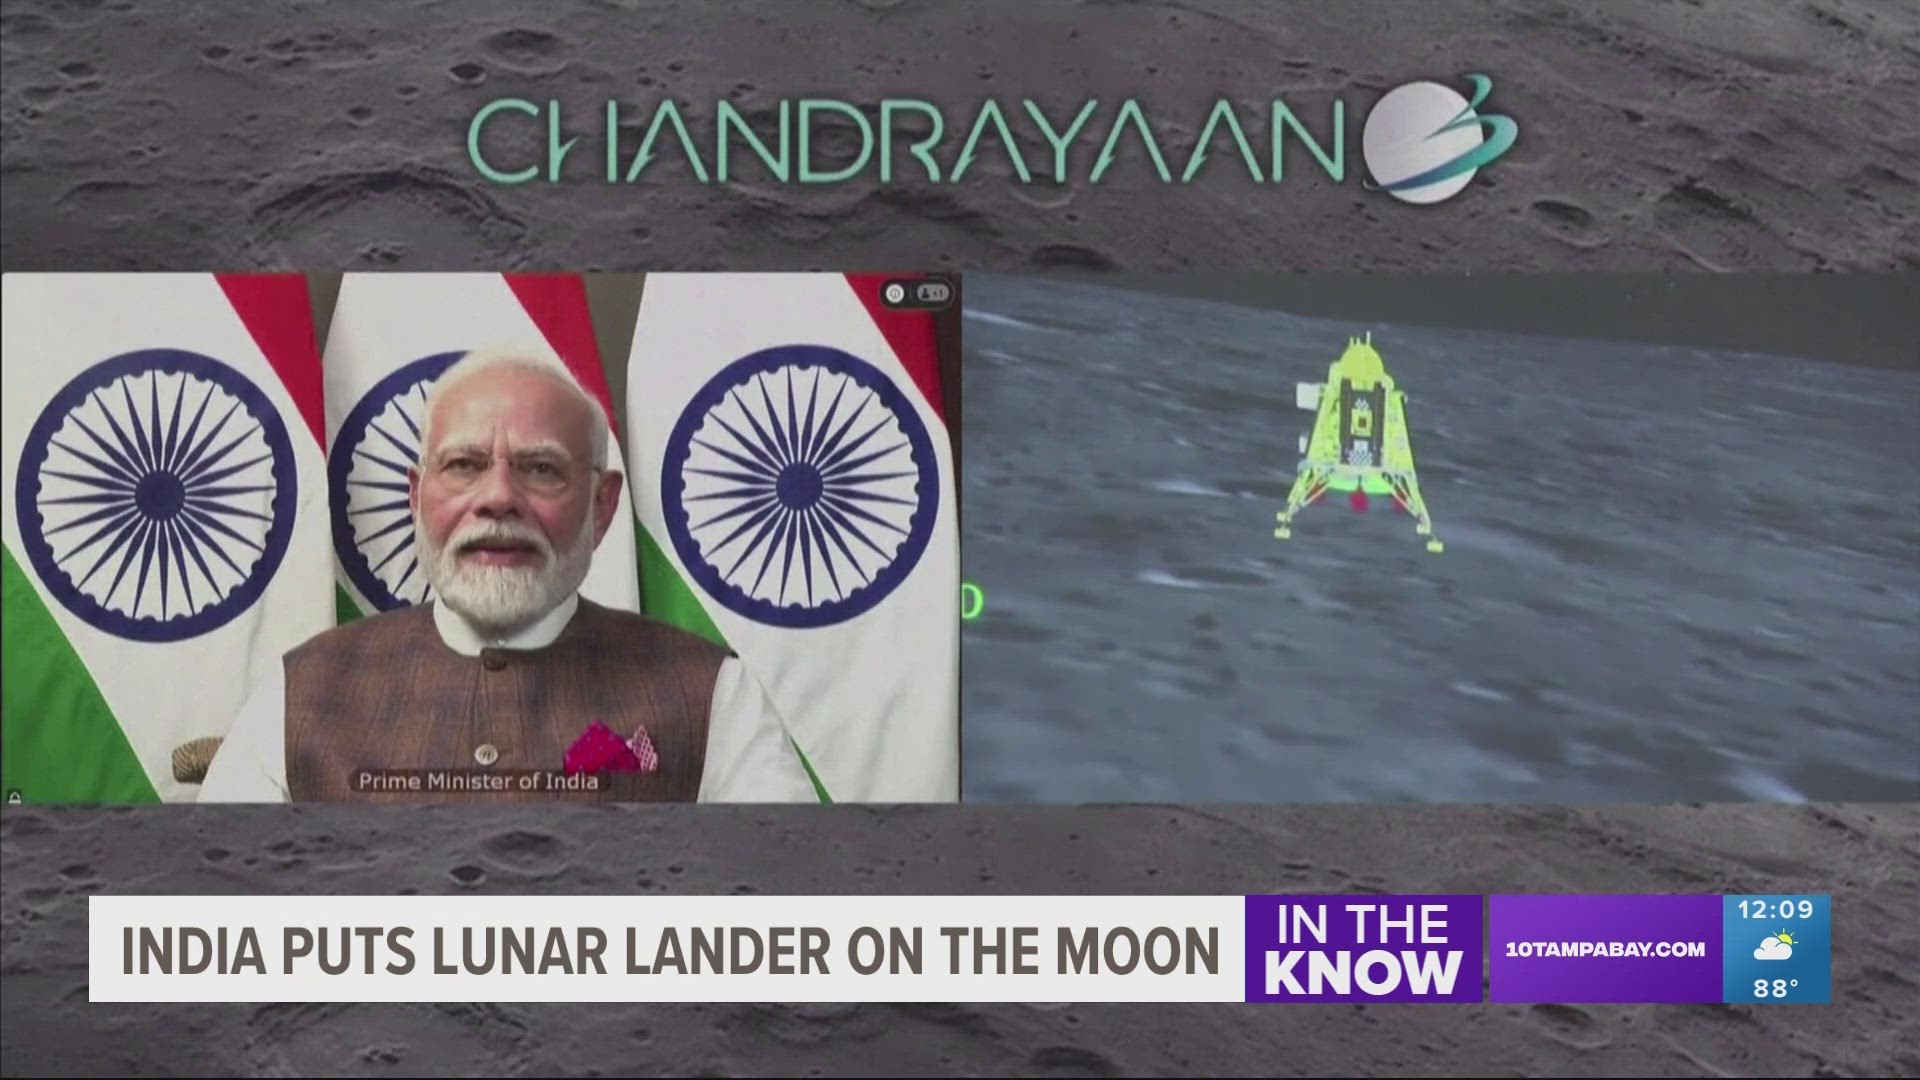 India’s successful landing comes just days after Russia’s Luna-25, which was aiming for the same lunar region, spun into an uncontrolled orbit and crashed.